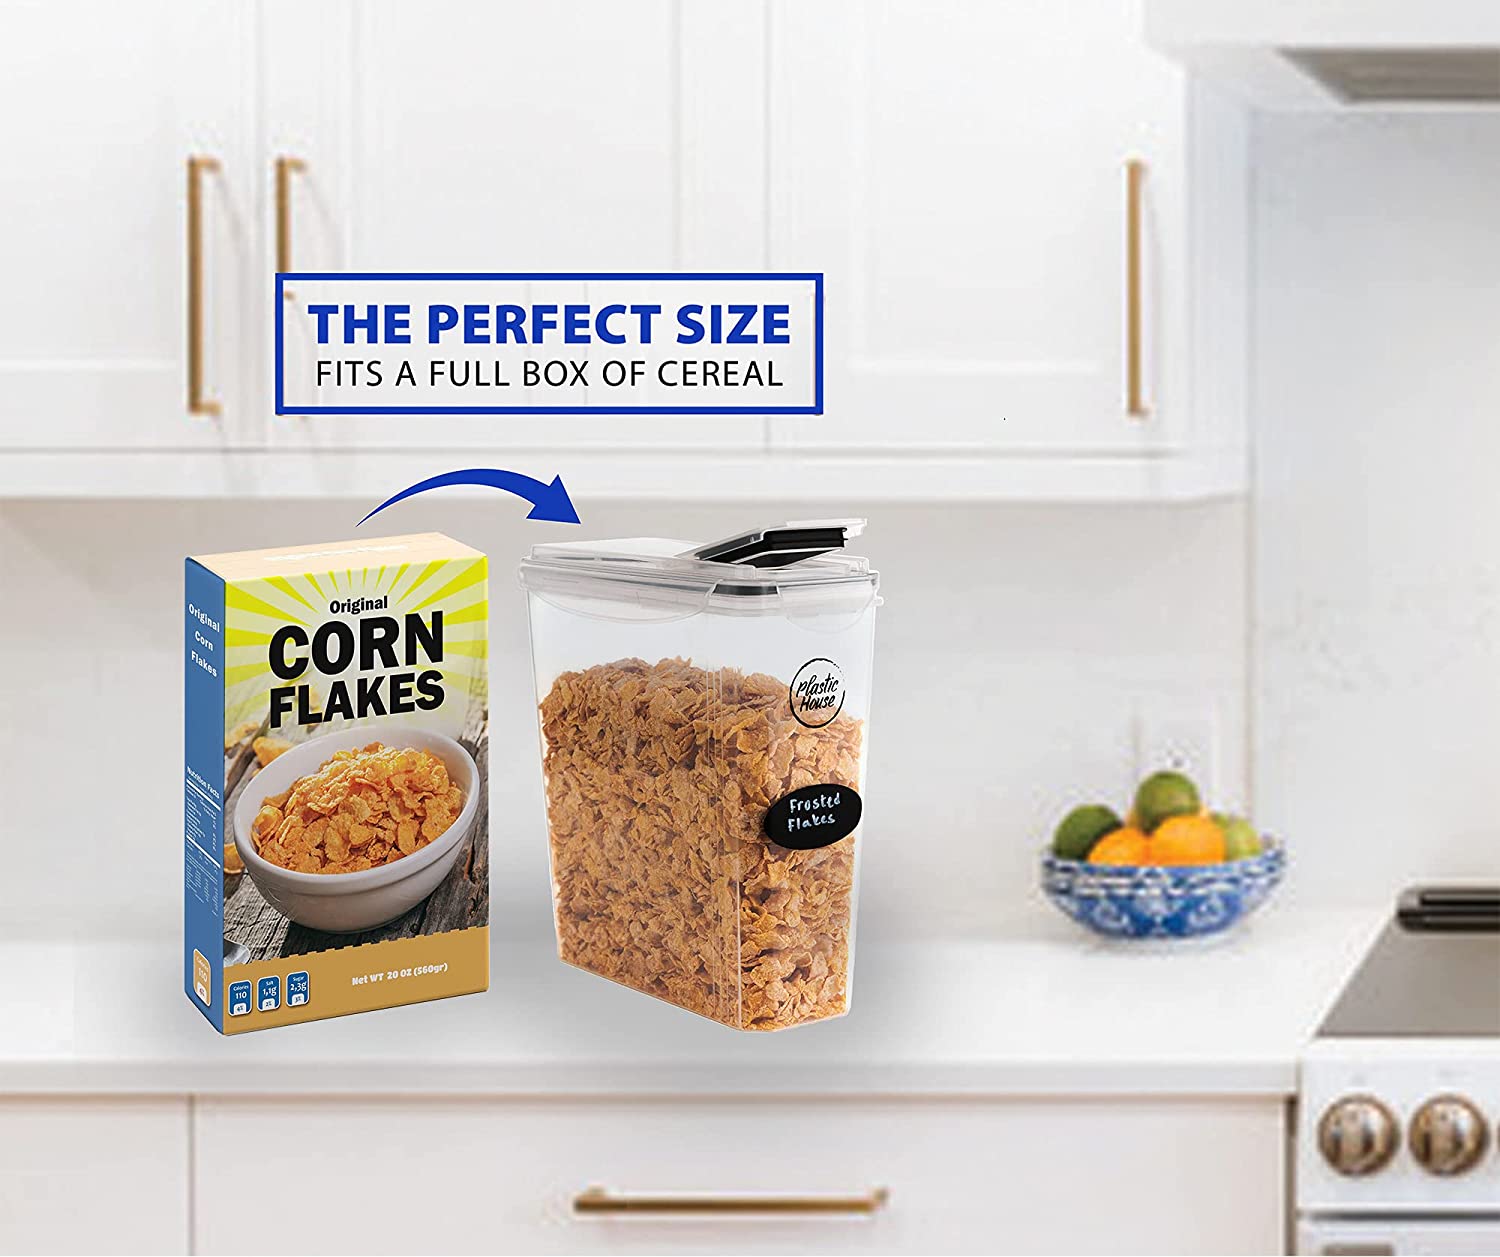 https://bigbigmart.com/wp-content/uploads/2021/11/PLASTIC-HOUSE-Large-Cereal-Containers-Storage-Set-Dispenser-Approx.-2.jpg